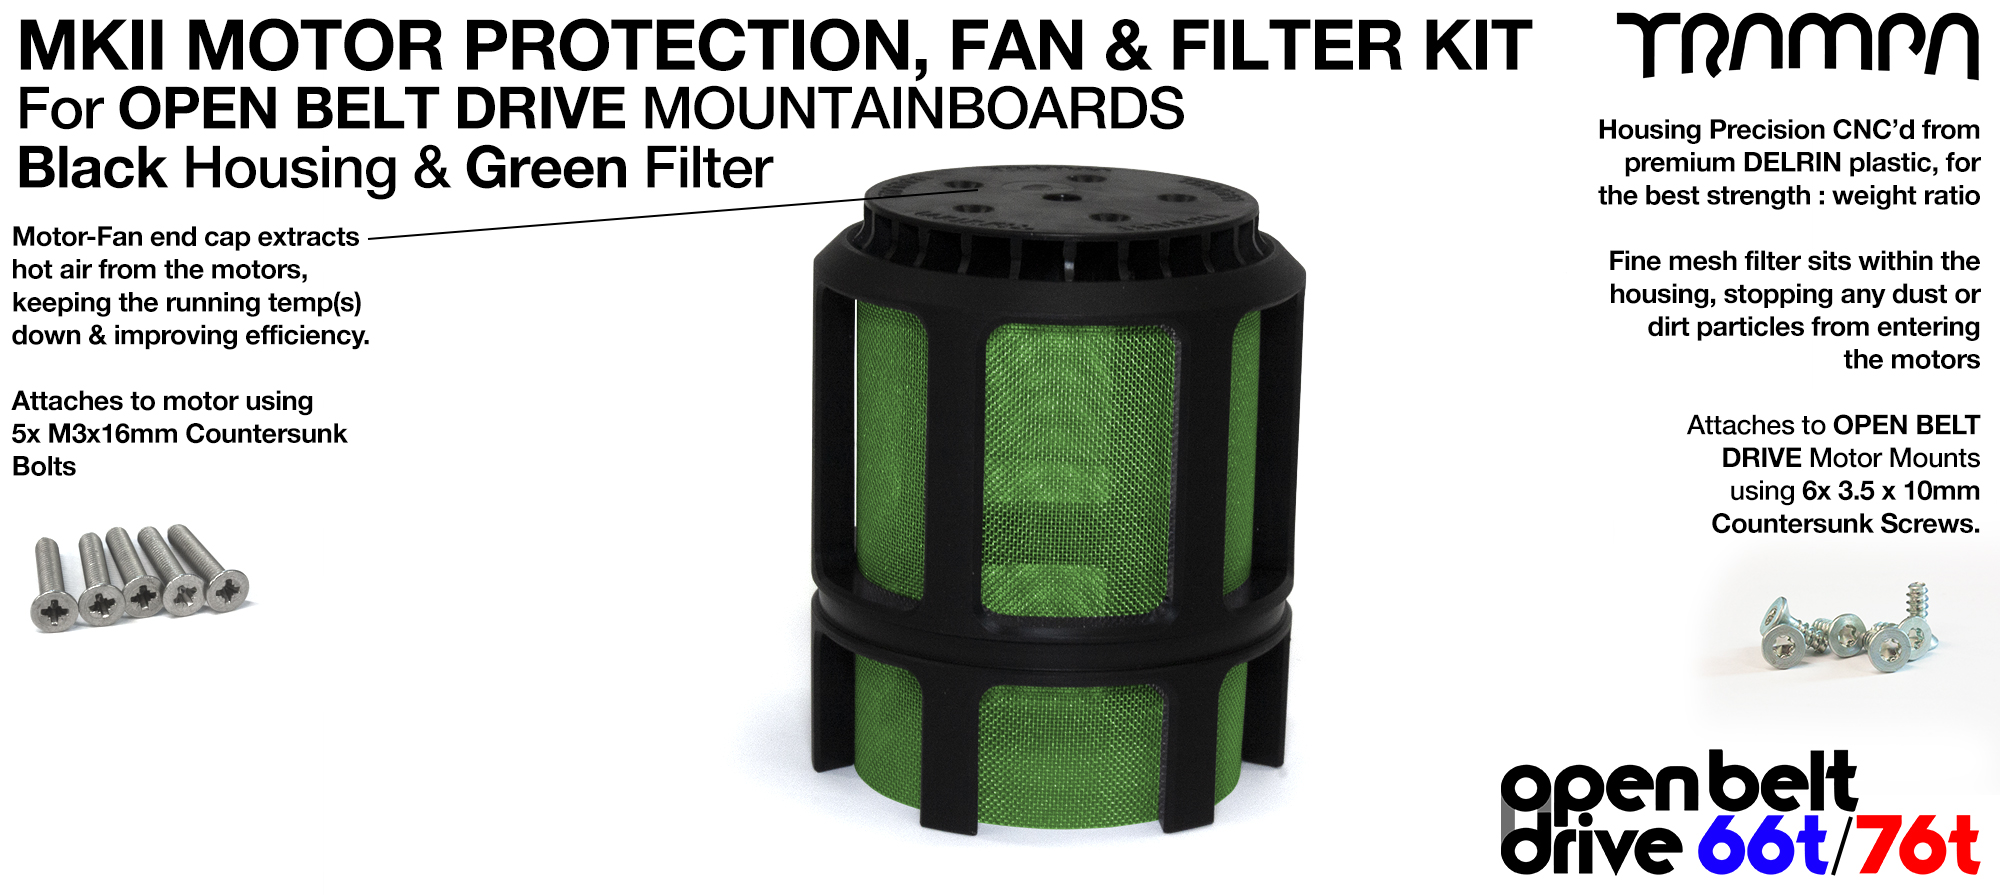 FULL CAGE Motor protection SUPER STRONG DELRIN Plastic includes Fan & GREEN Filter - SINGLE